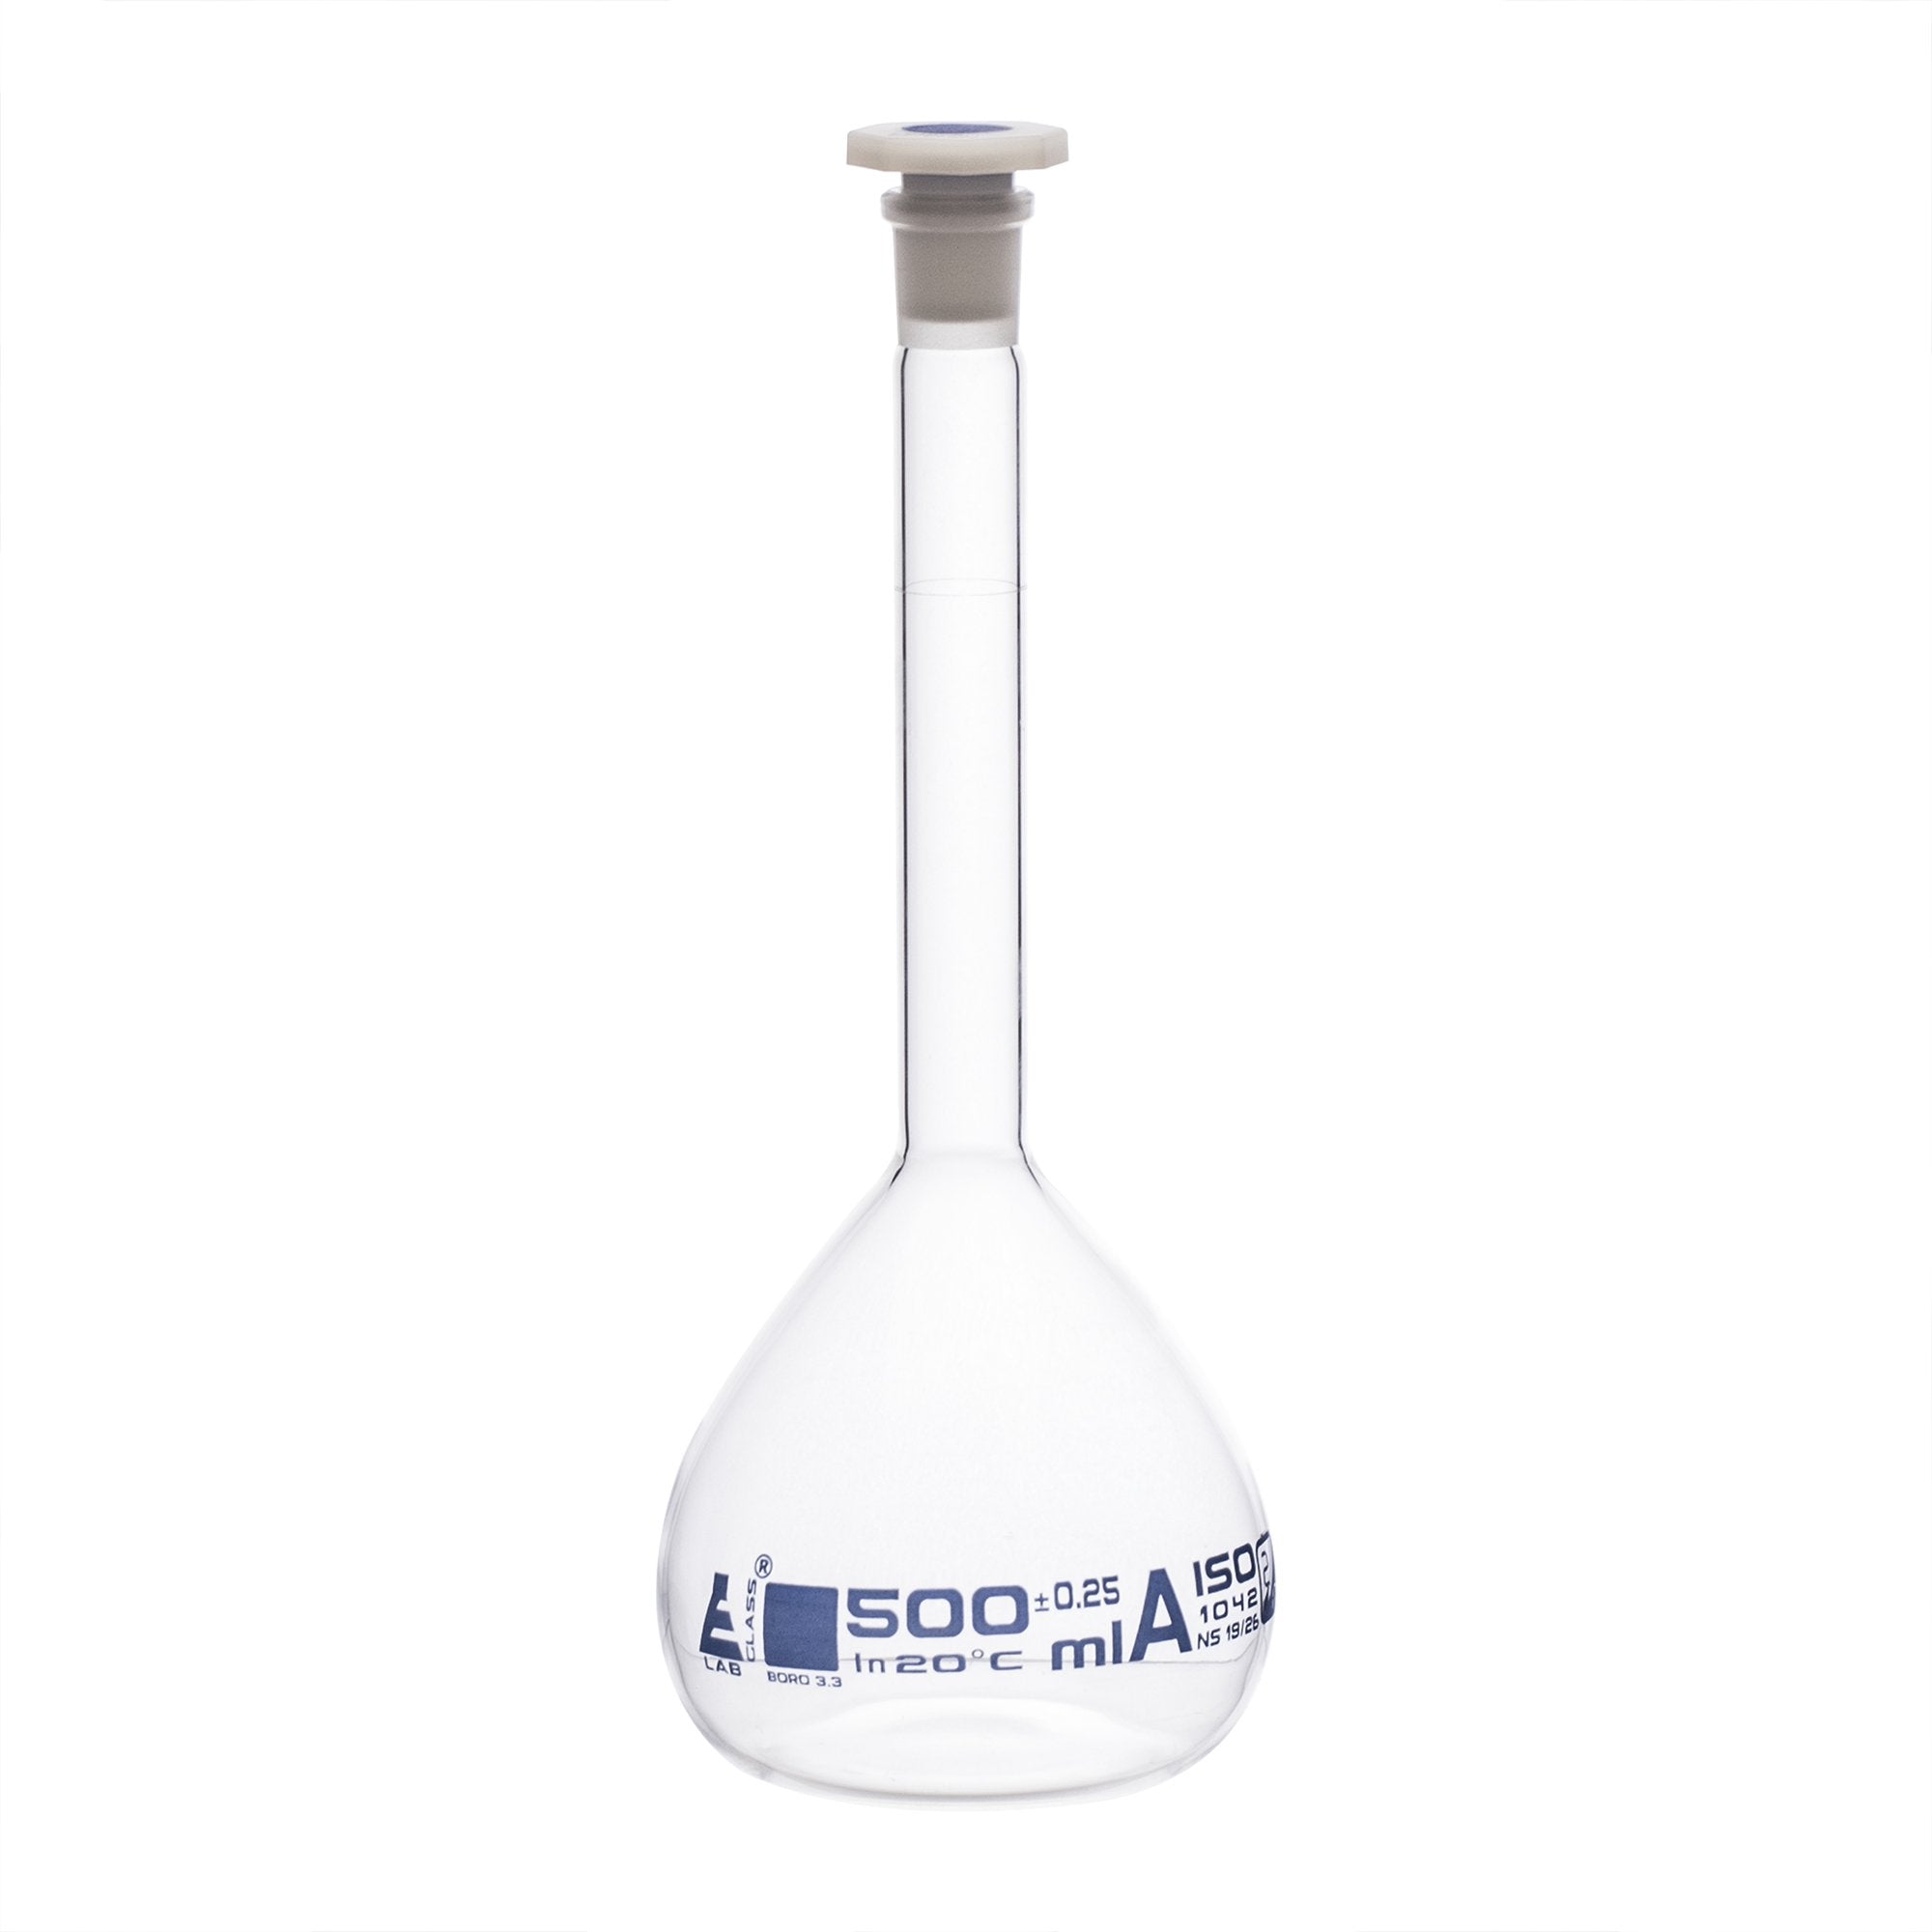 Borosilicate Glass Volumetric Flask with Polypropylene Stopper, 500 ml, Class A with Individual Work Certificate, Pack of 2,  Autoclavable